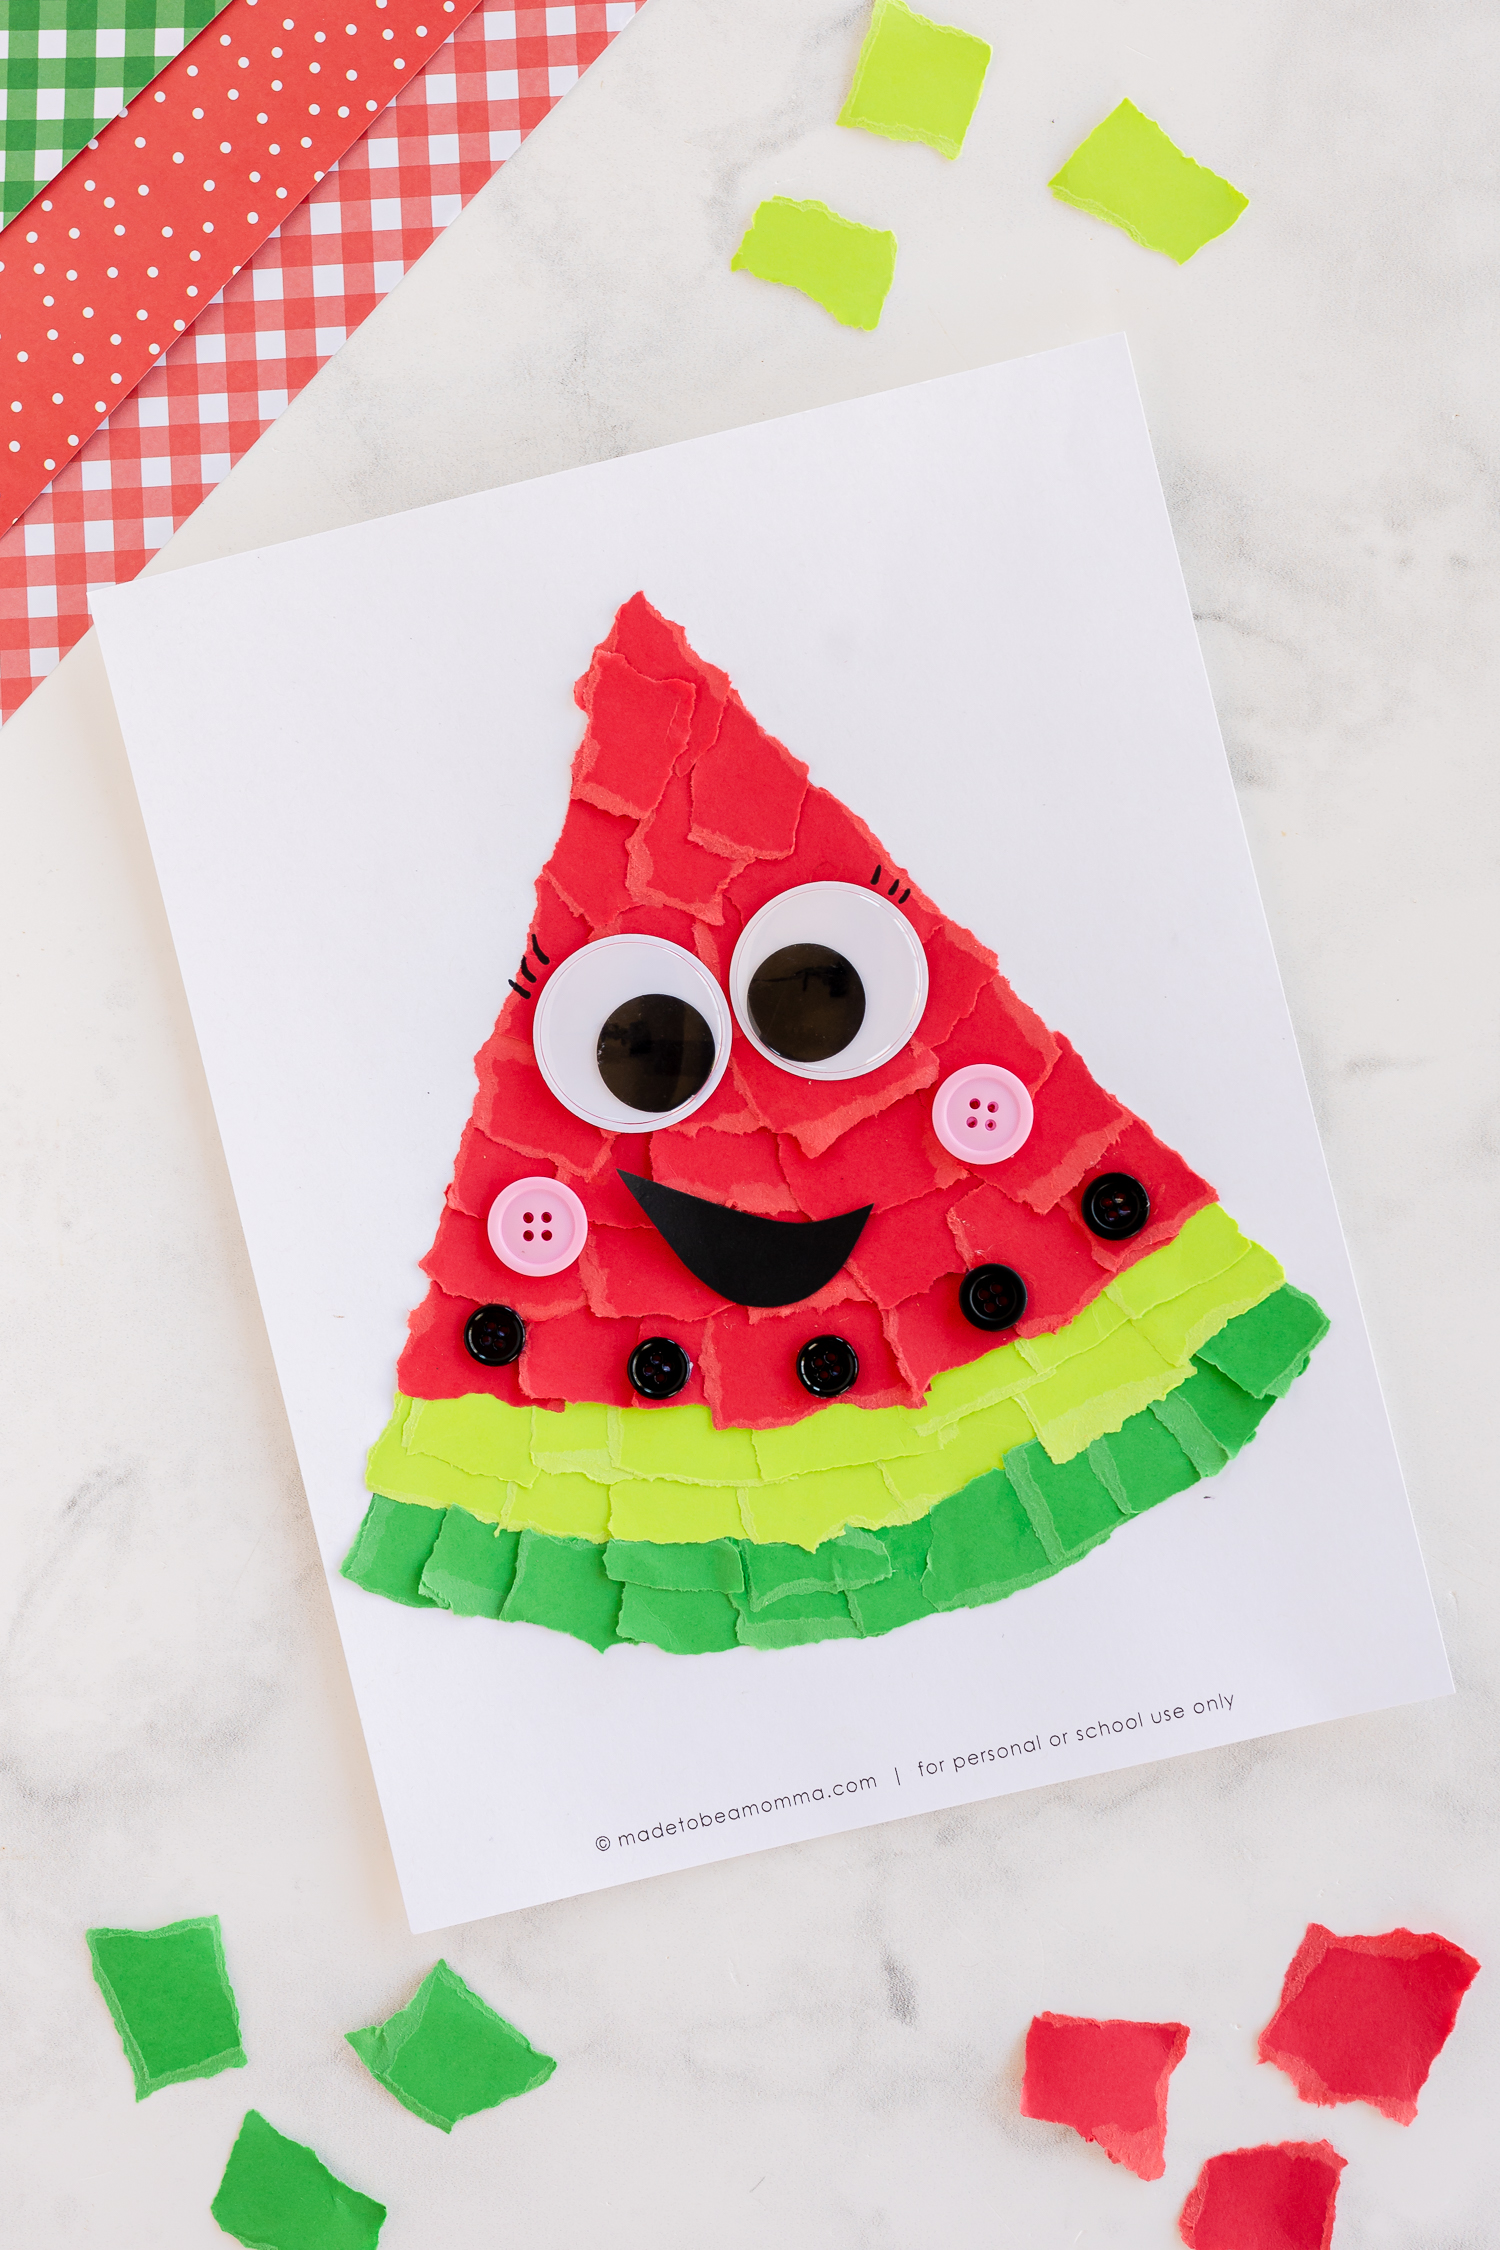 torn paper watermelon art on counter with large googly eyes